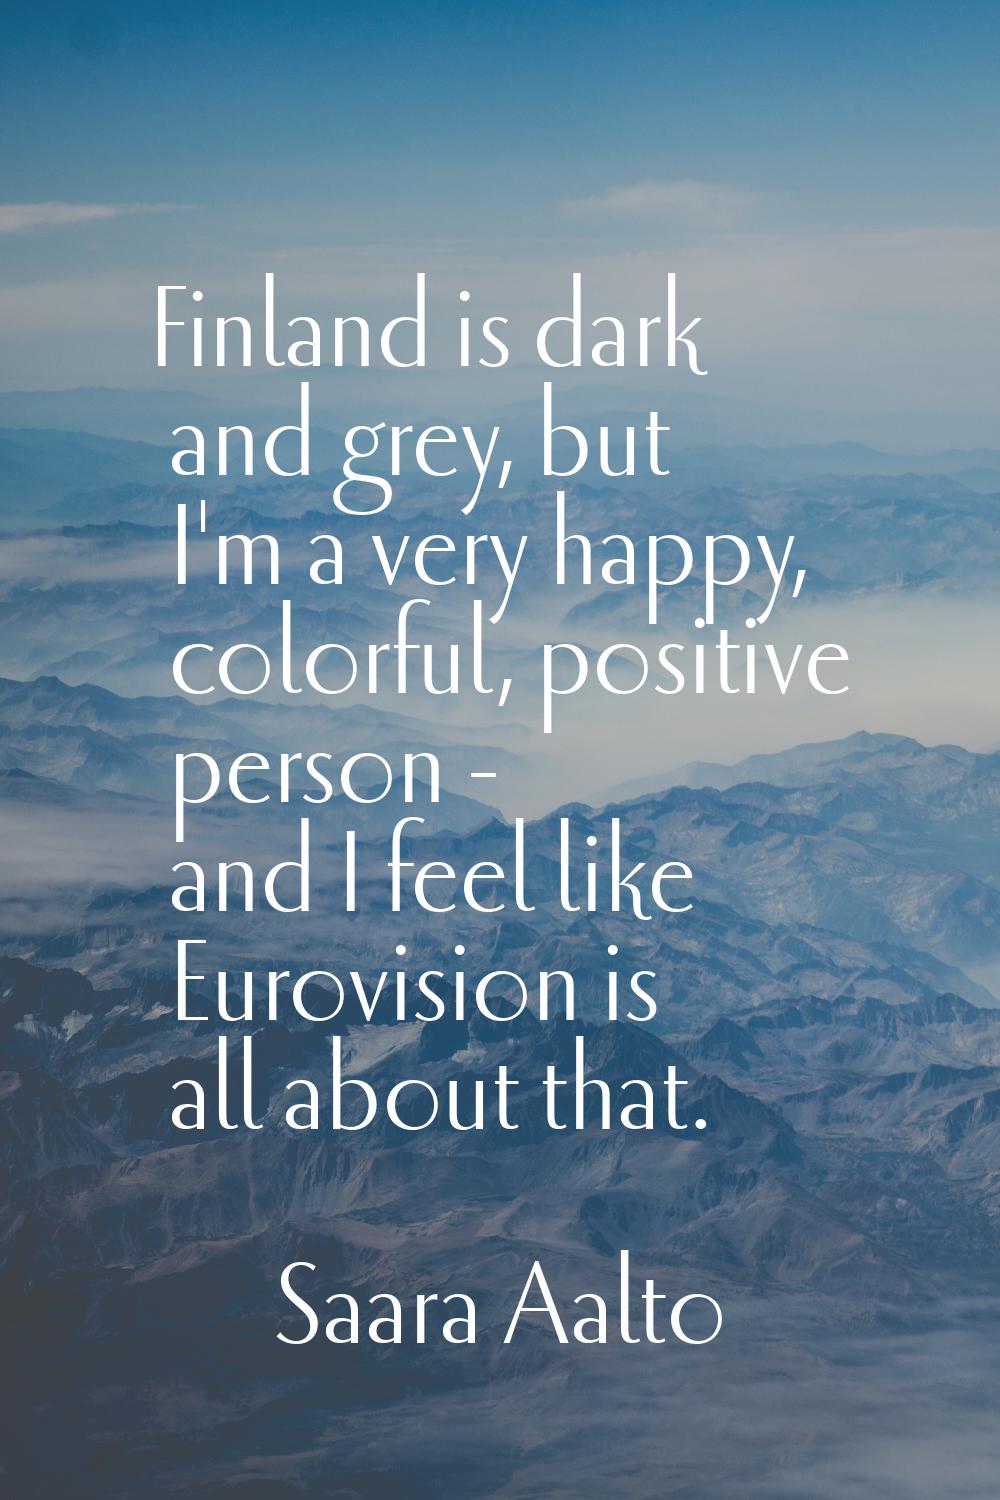 Finland is dark and grey, but I'm a very happy, colorful, positive person - and I feel like Eurovis